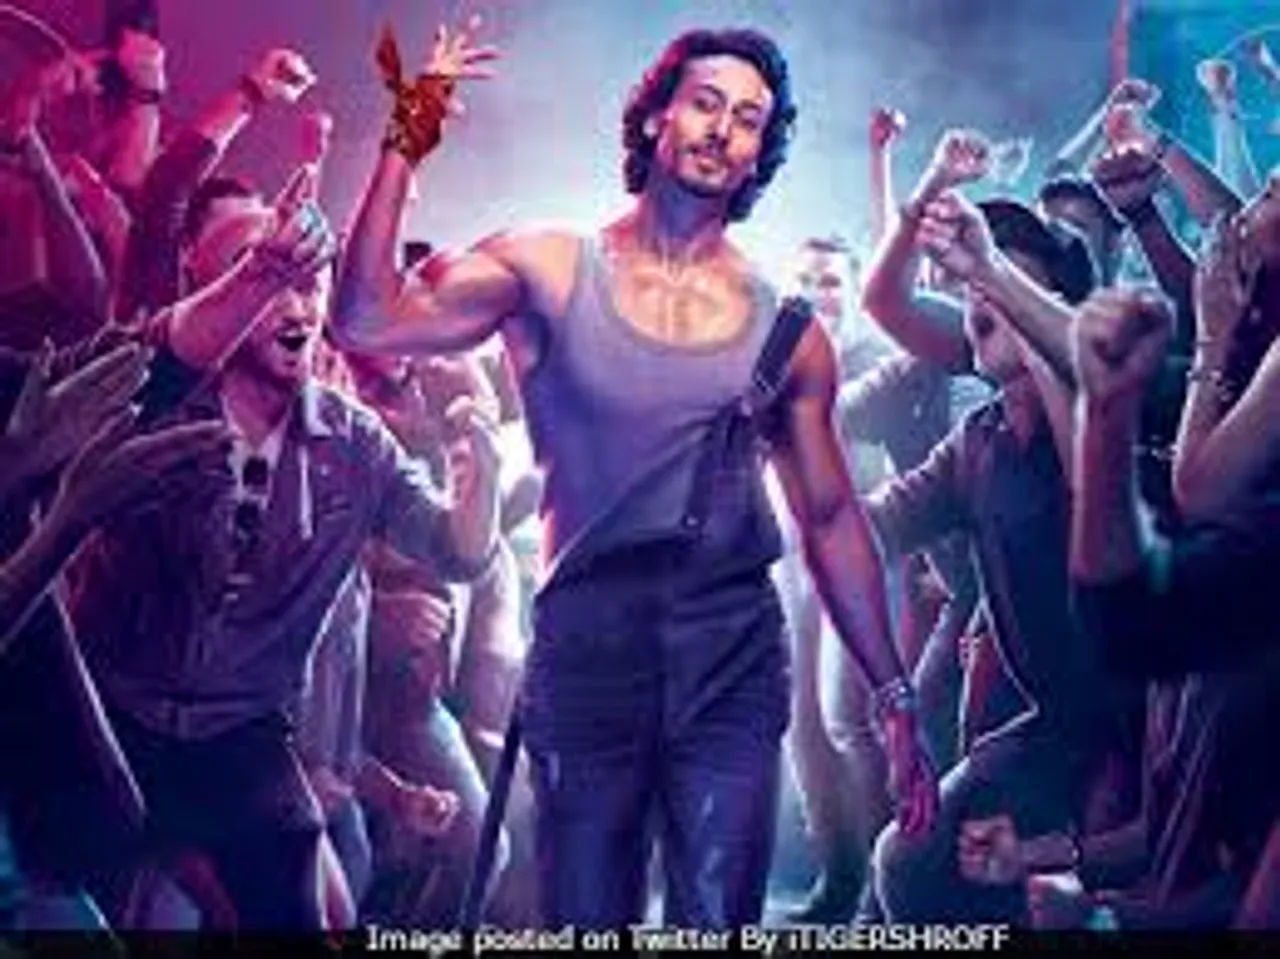 TIGER SHROFF'S 'MUNNA MICHAEL' IS HITTING BOX OFFICE WITH ITS COLLECTION.